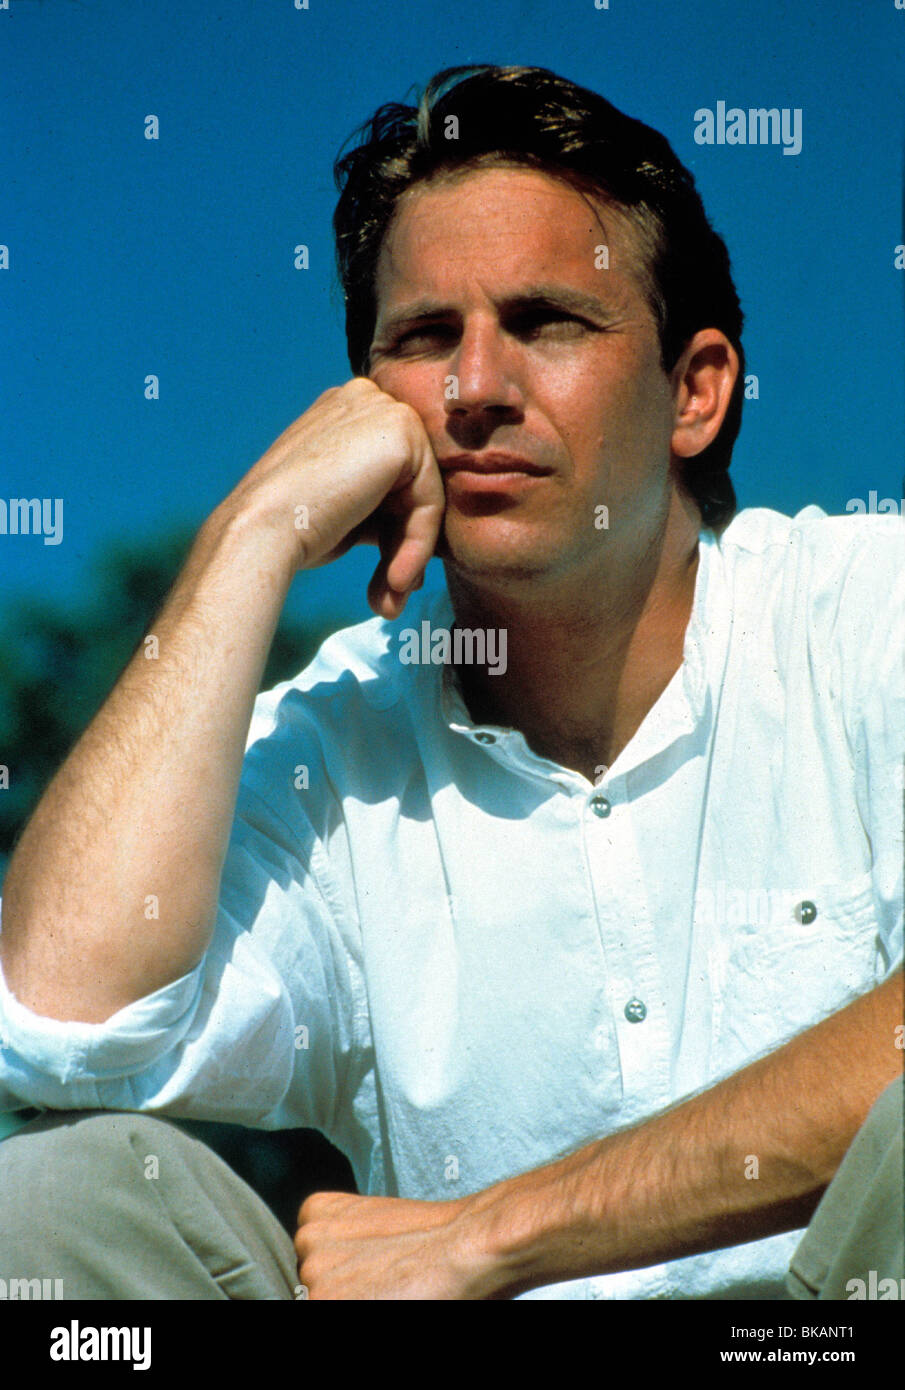 FIELD OF DREAMS (1989) KEVIN COSTNER FOD 061 MOVIESTORE COLLECTION LTD Foto Stock